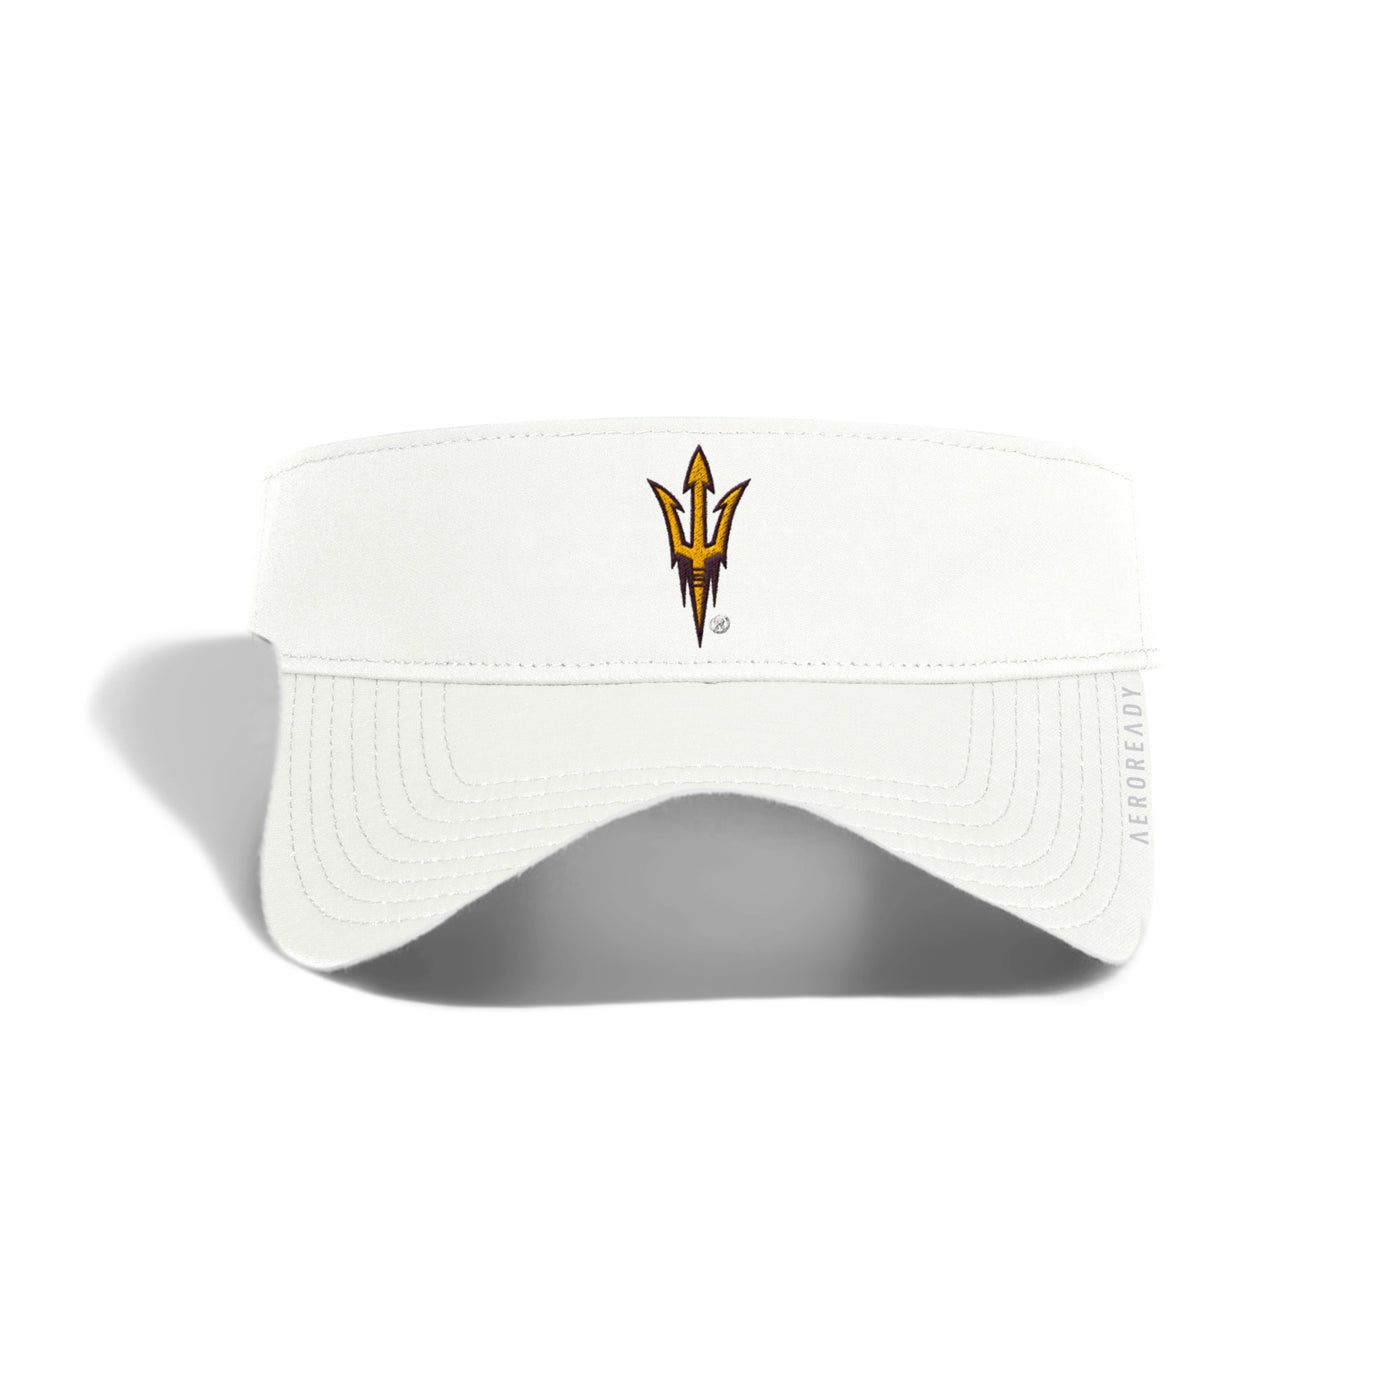 ASU white visor with pitchfork on front